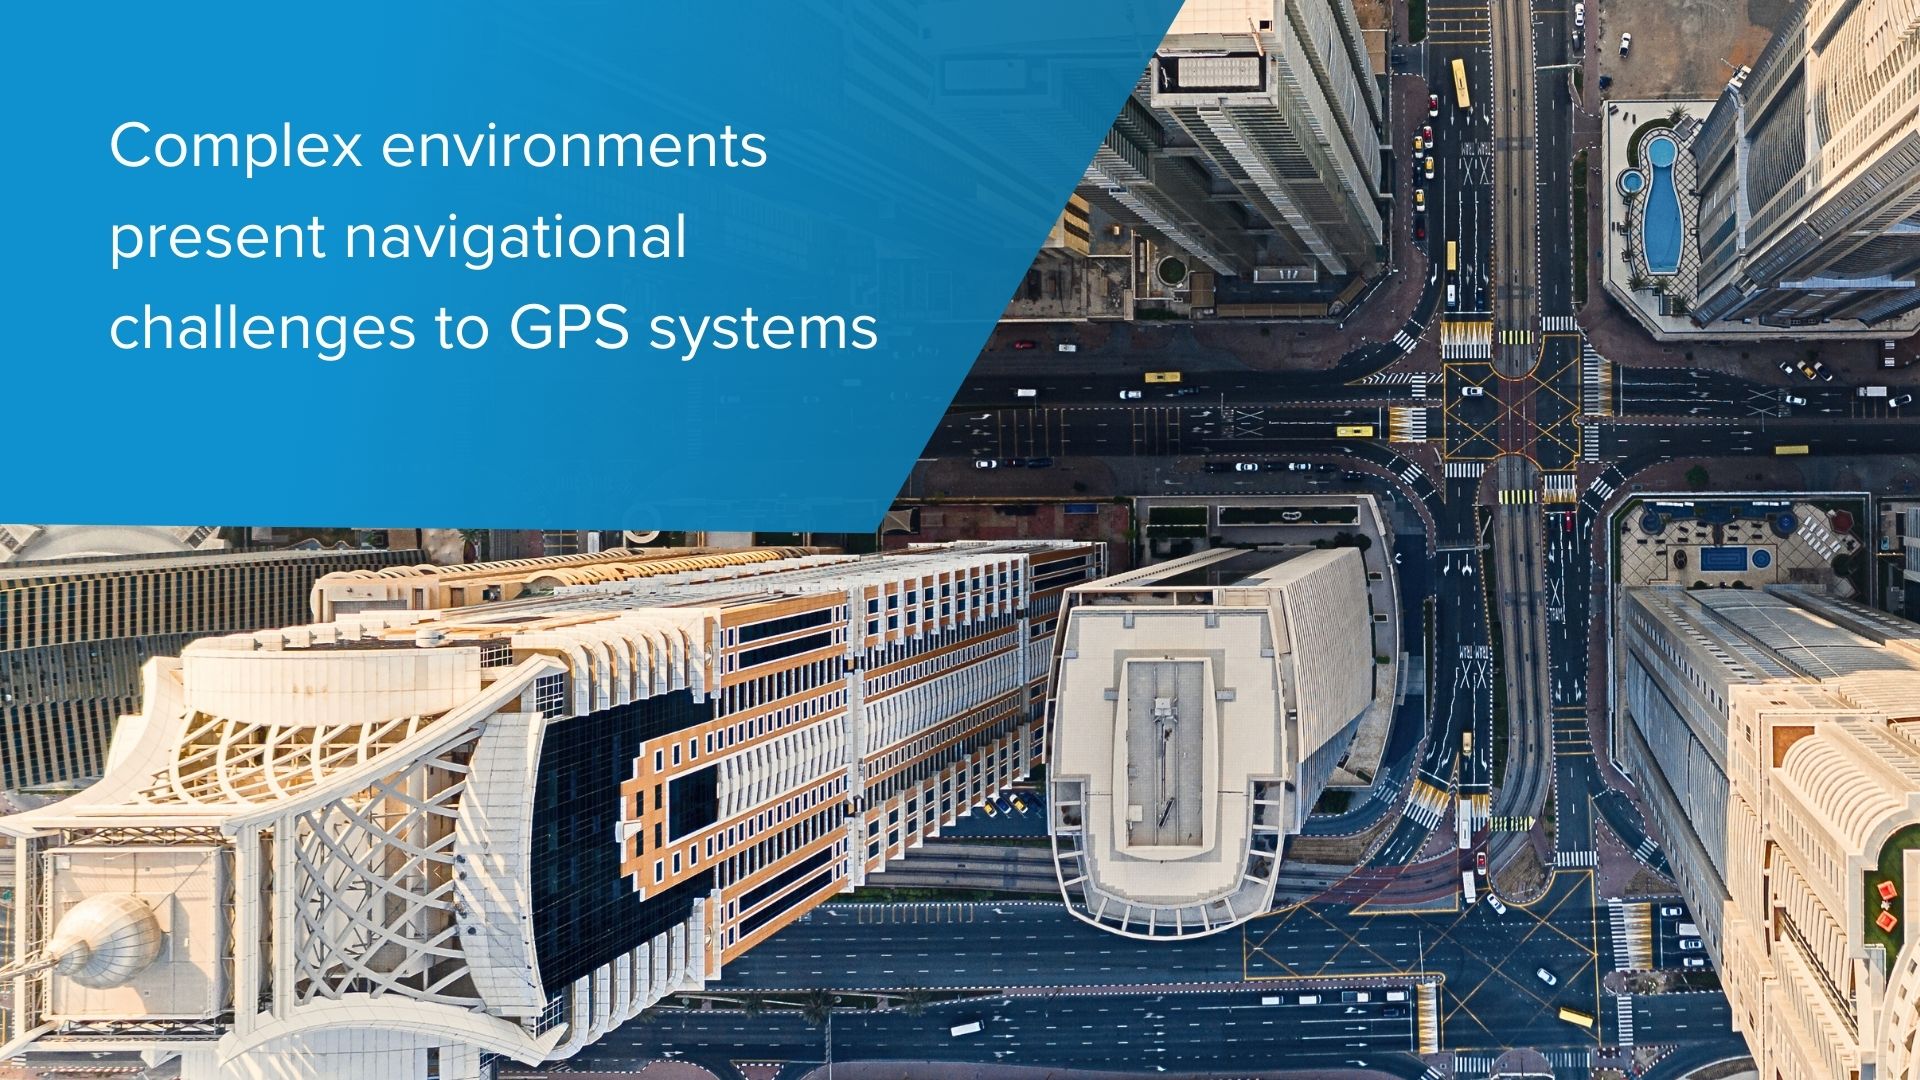 Complex environments present navigational challenges to GPS systems